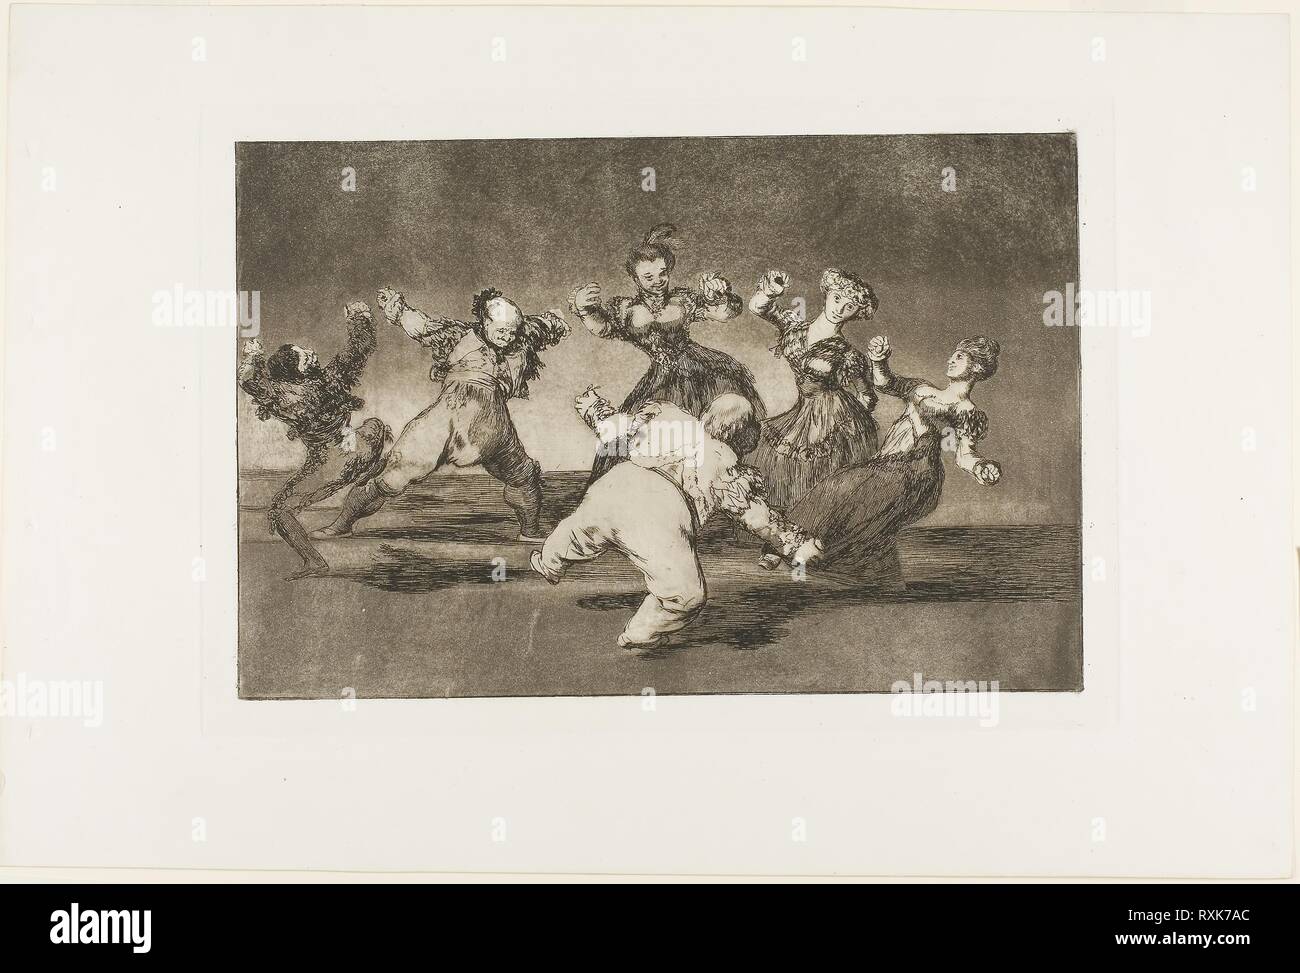 Merry Folly, from Disparates, published as plate 12 in Los Proverbios. Francisco José de Goya y Lucientes; Spanish, 1746-1828. Date: 1816-1819. Dimensions: 214 x 324 mm (image); 244 x 353 mm (plate); 331 x 497 mm (sheet). Etching, burnished aquatint, and drypoint in brown-black on ivory wove paper. Origin: Spain. Museum: The Chicago Art Institute. Stock Photo